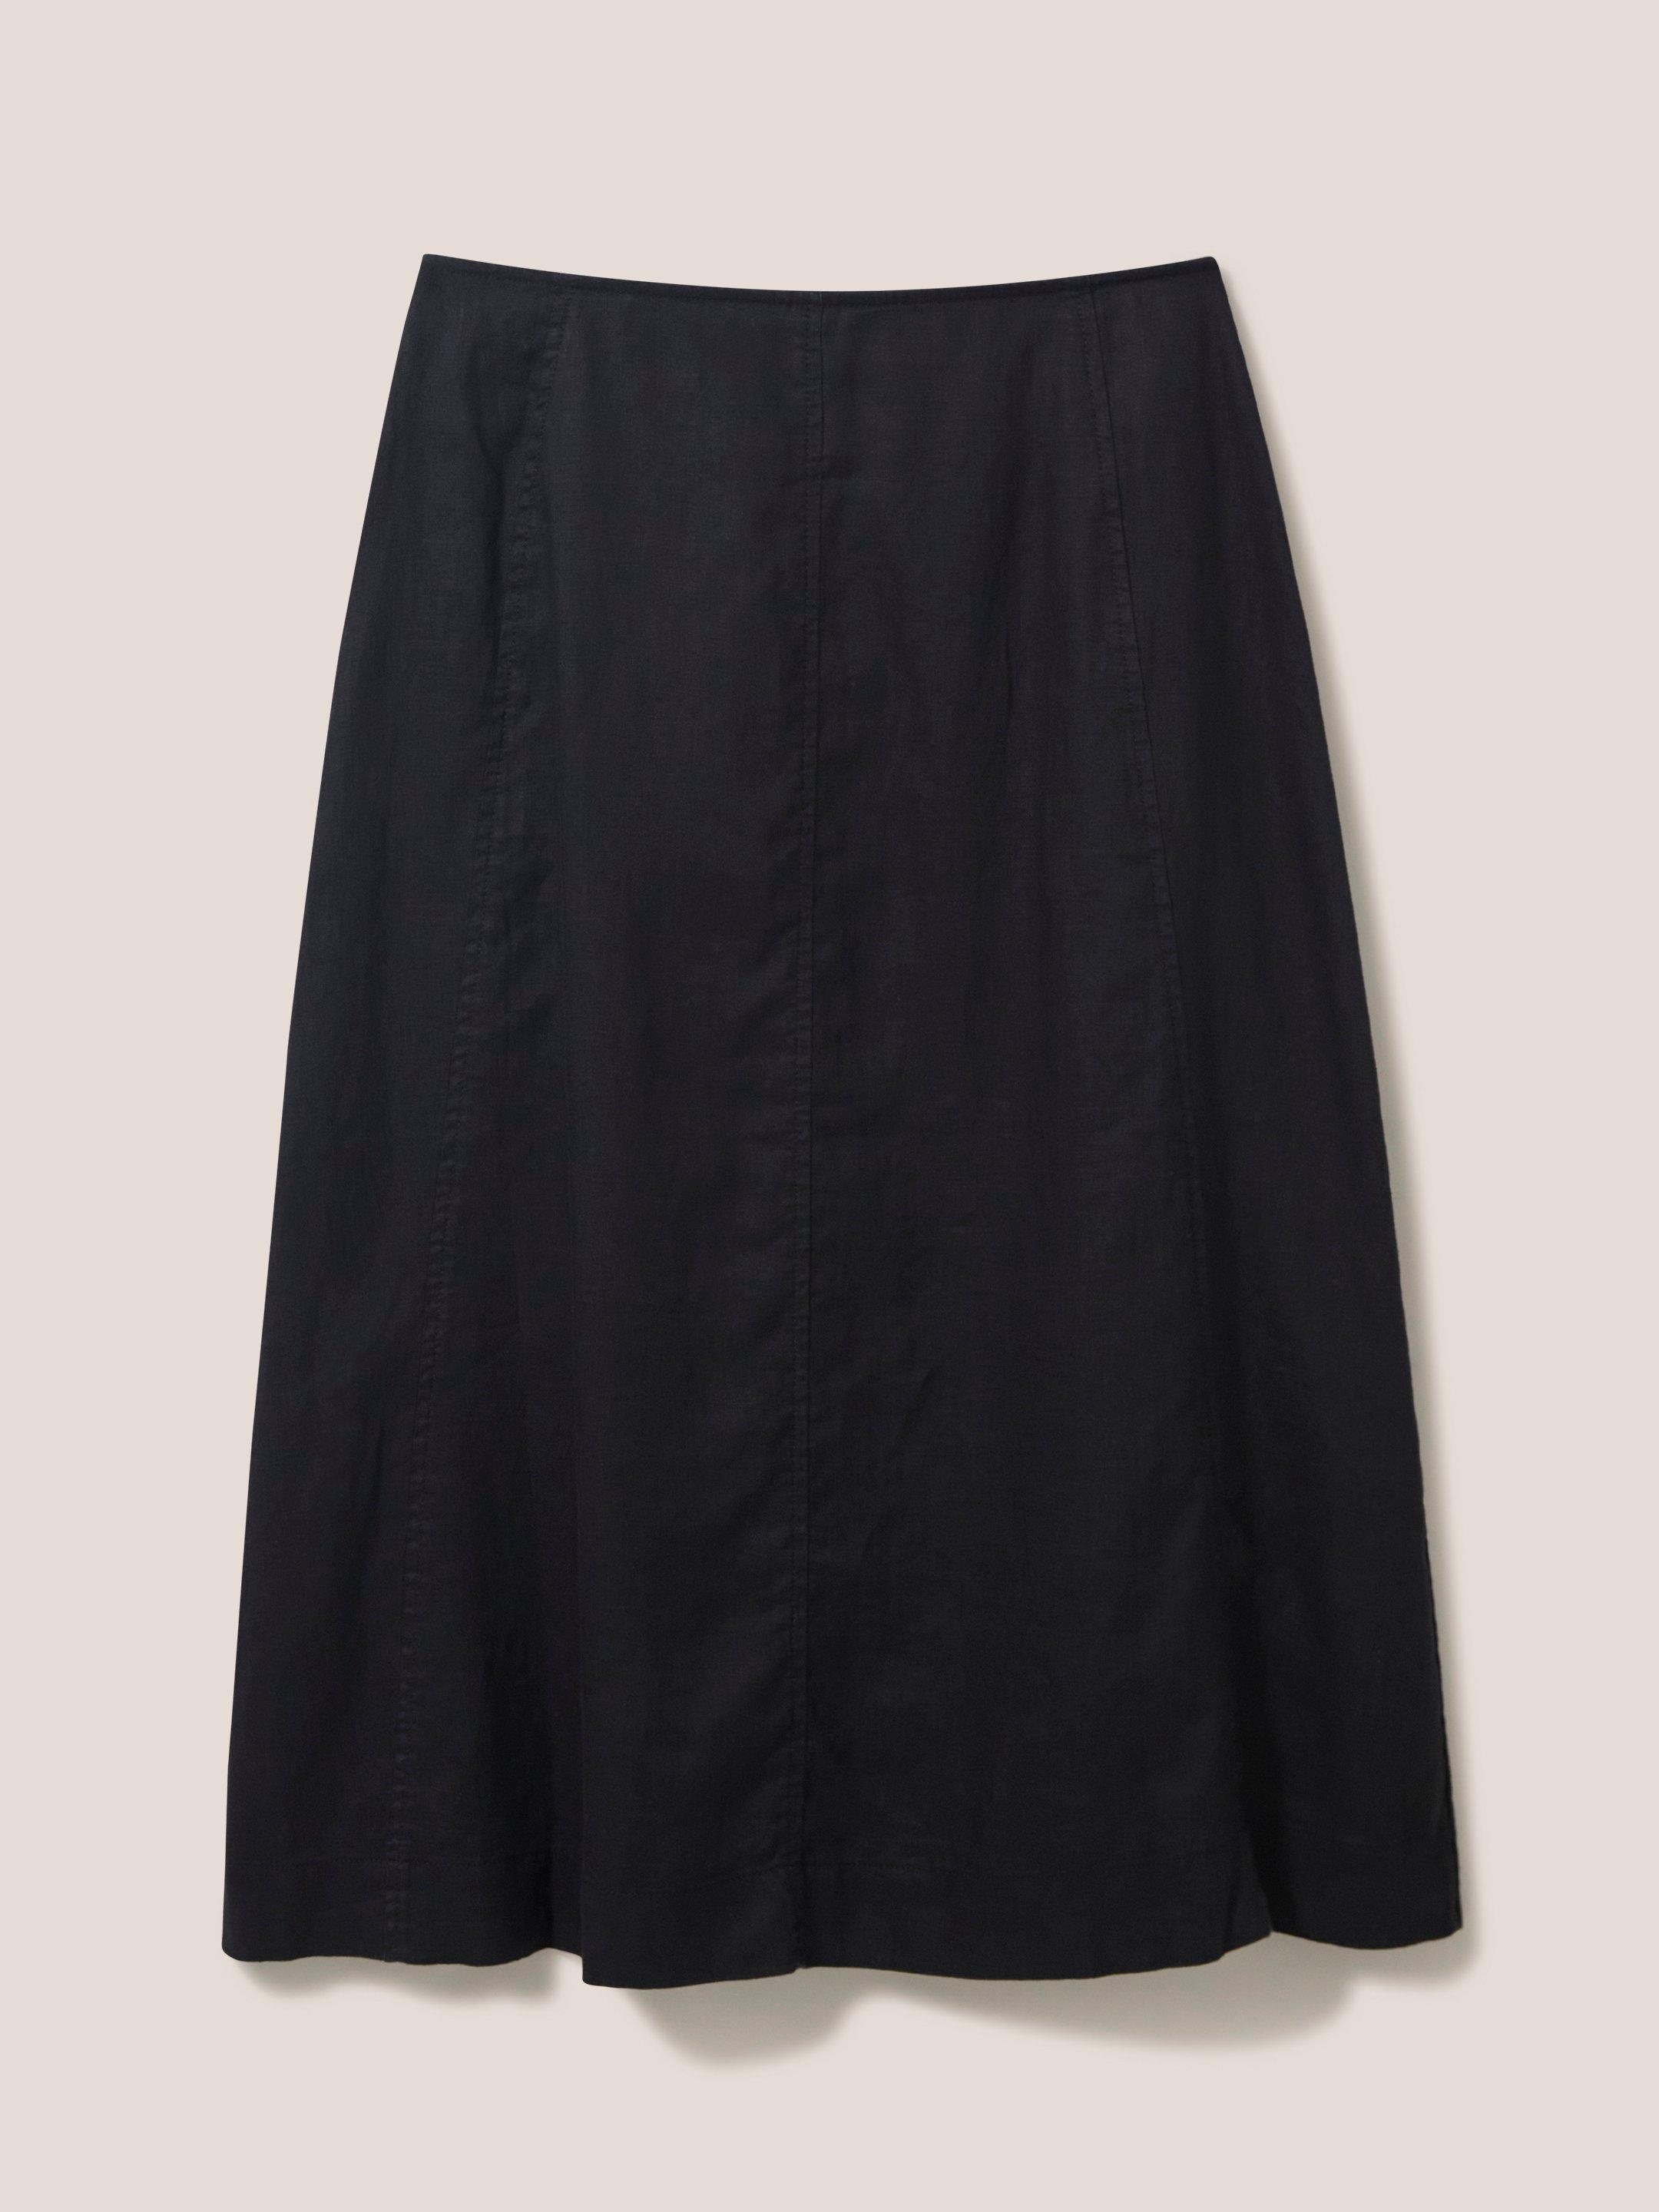 Ciara Linen Skirt in WASHED BLK - FLAT BACK